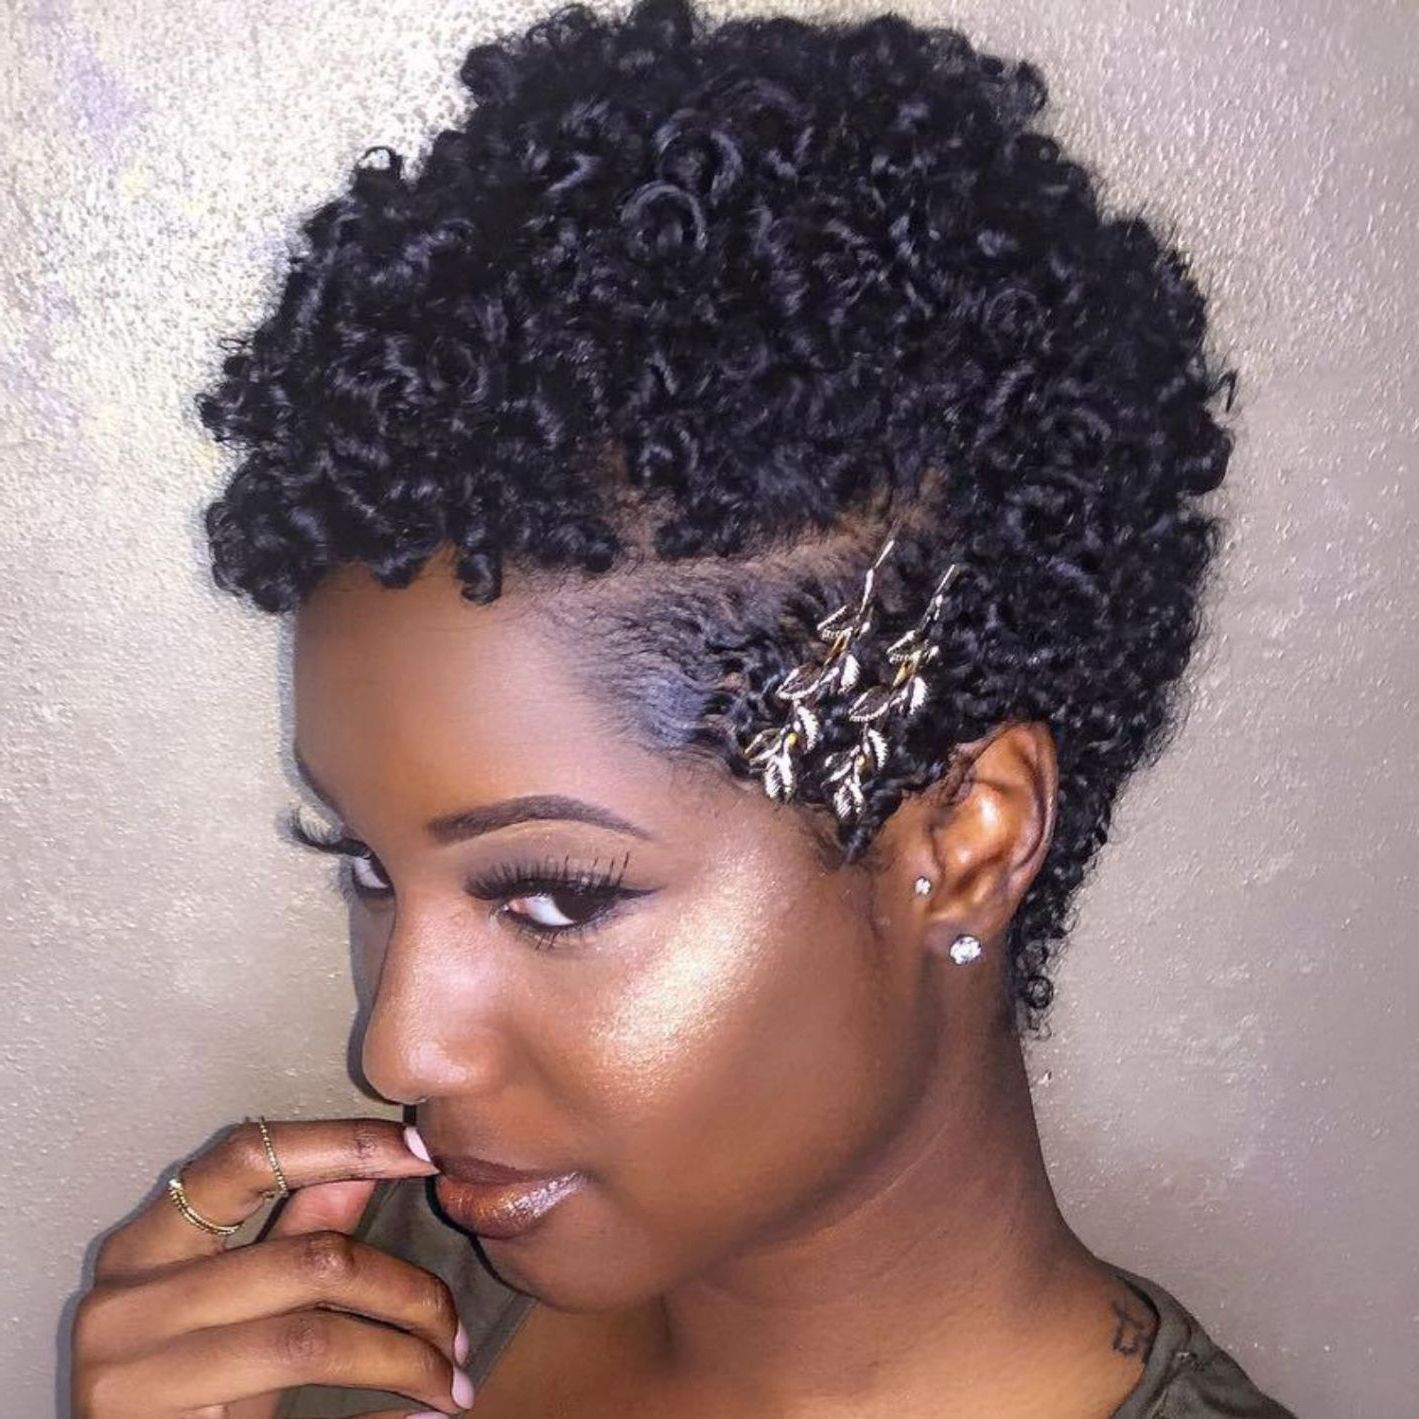 75 Most Inspiring Natural Hairstyles For Short Hair | Hairstyles With Regard To Curly Black Short Hairstyles (View 24 of 25)